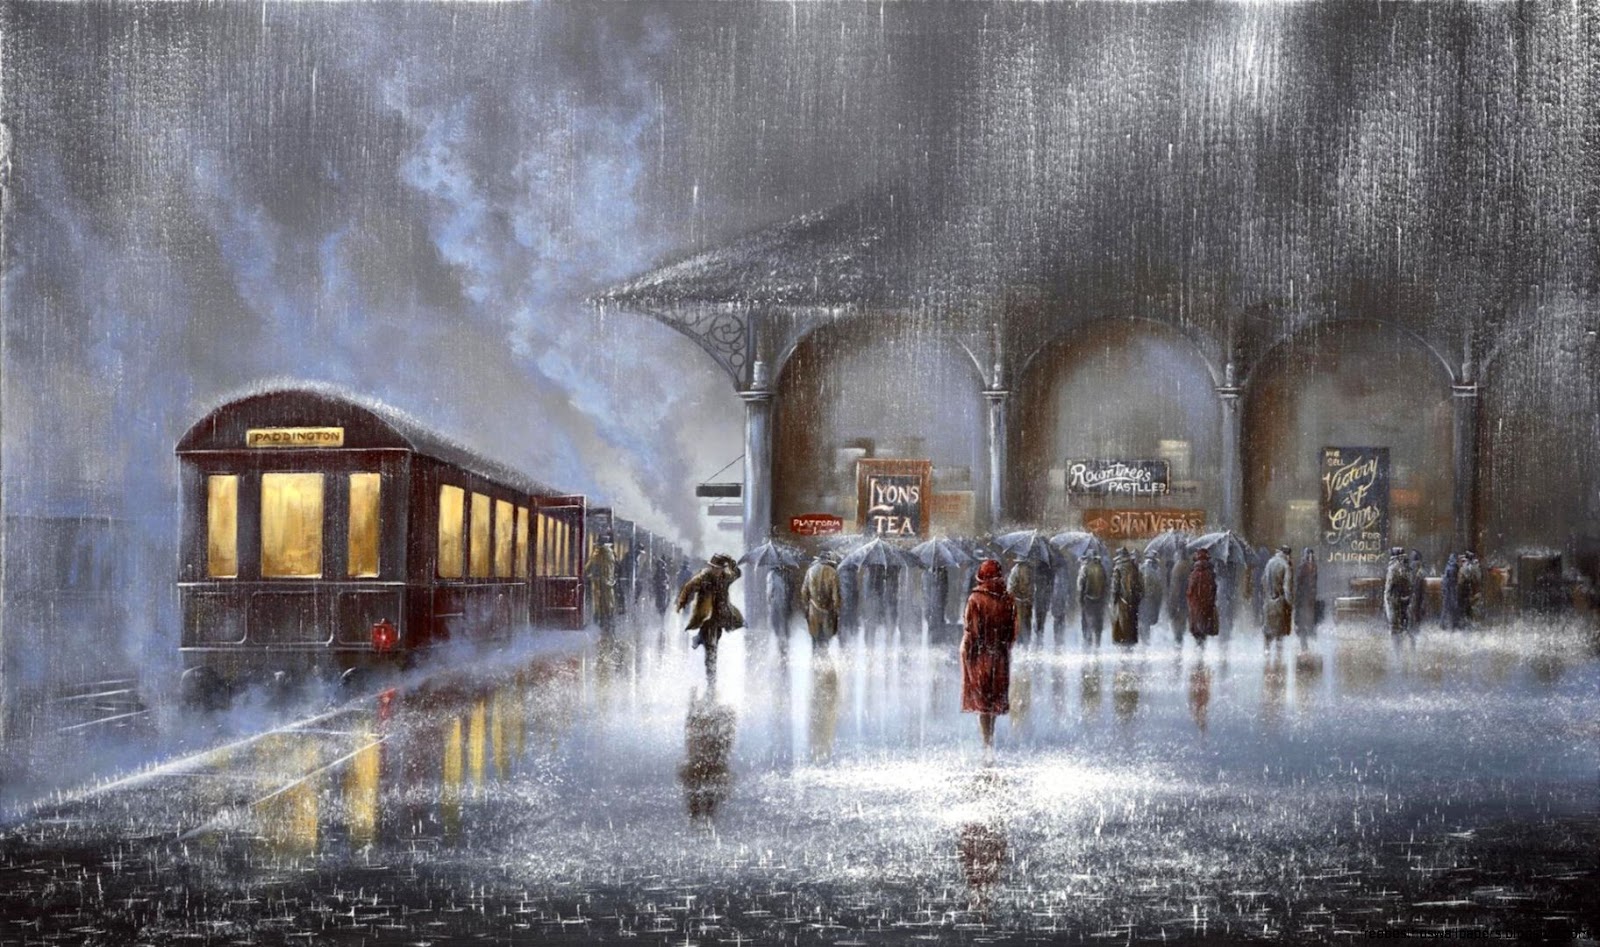 Train Station Painting Free Best Hd Wallpapers